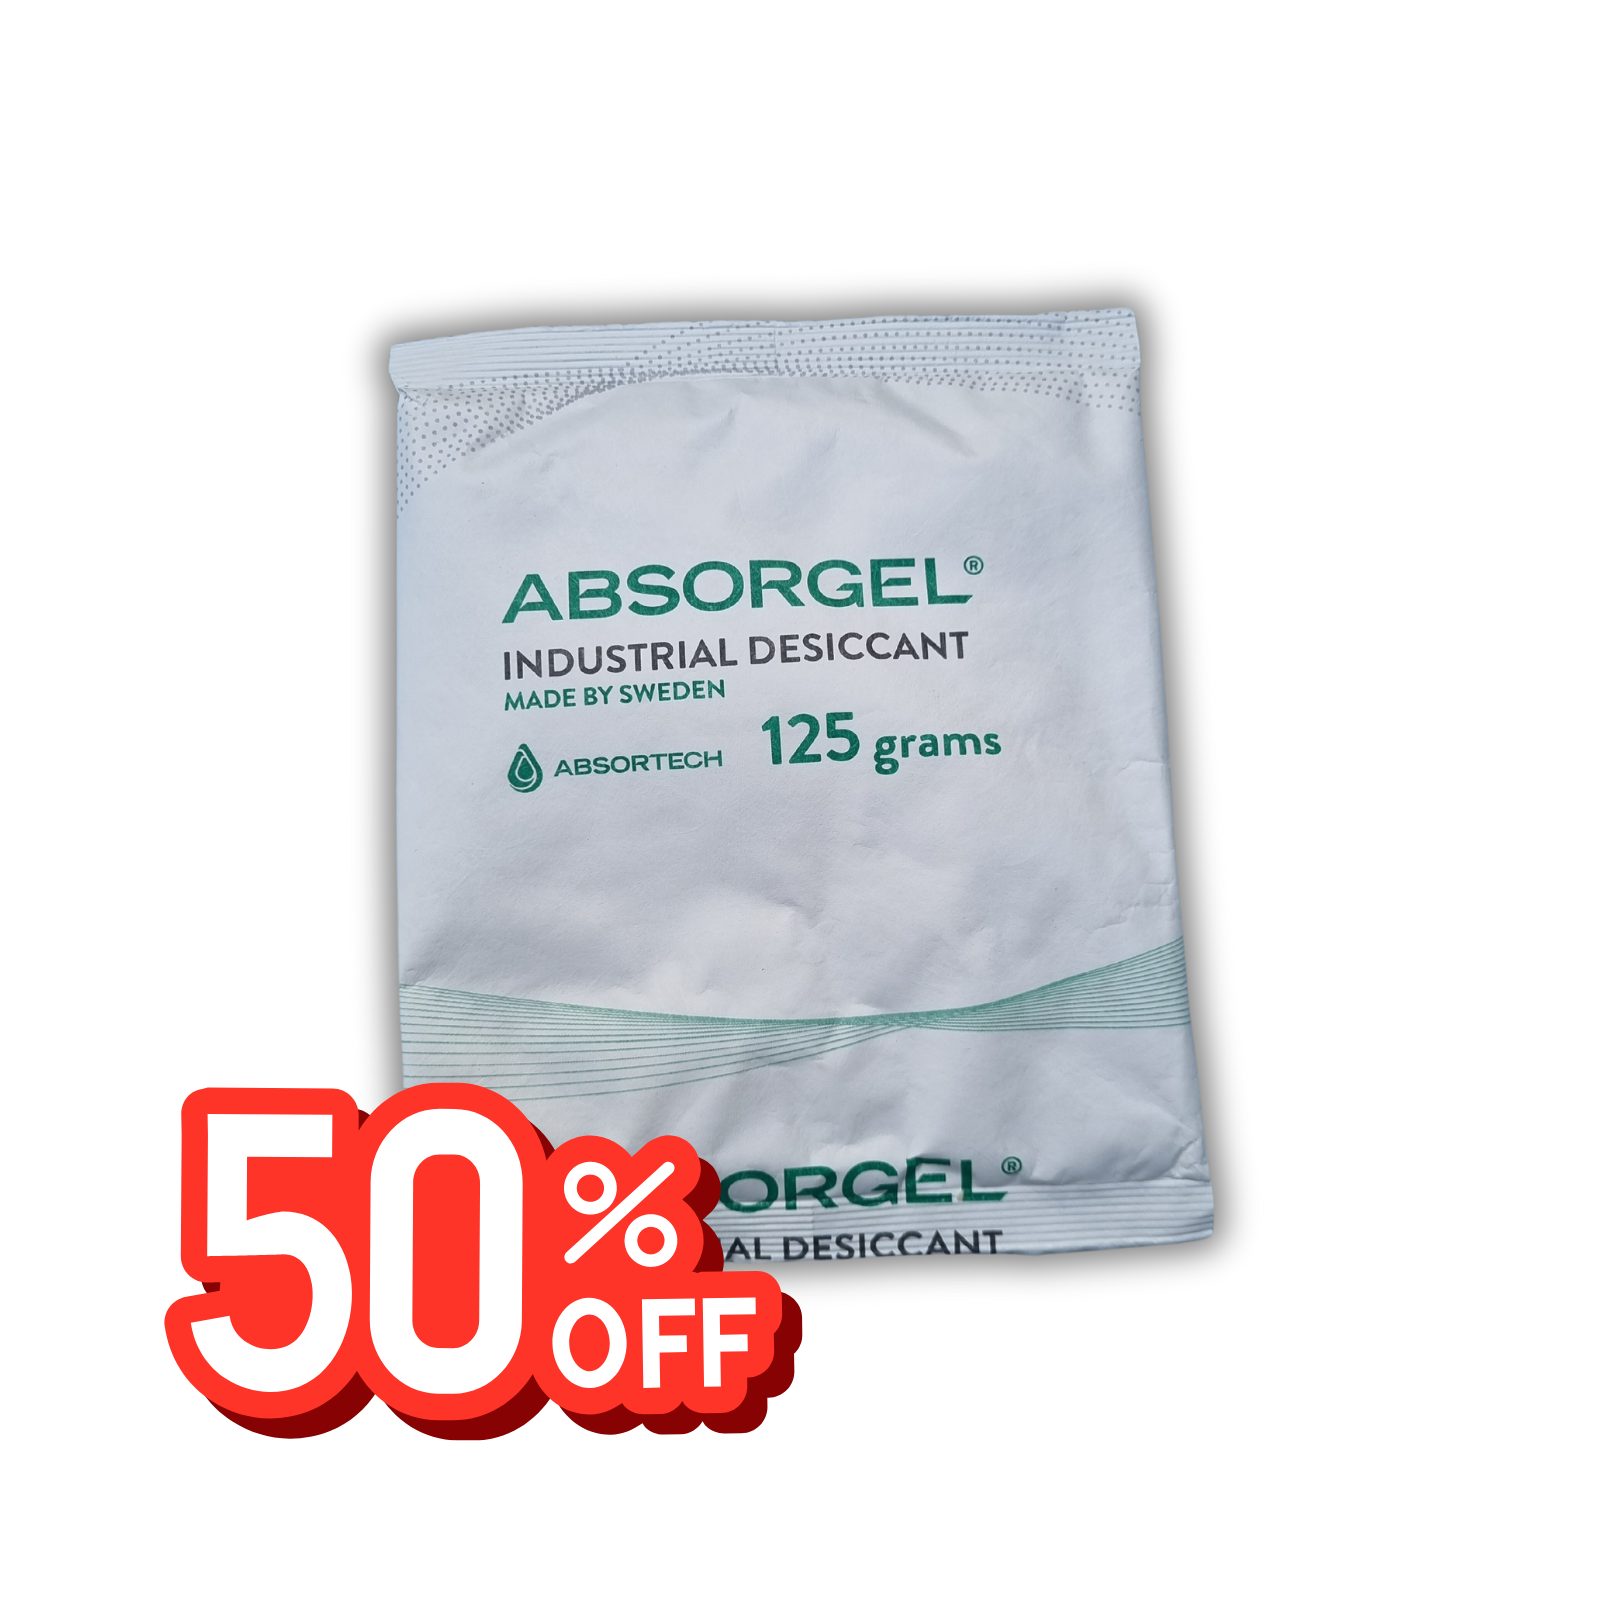 Absorgel 125g Pouch. Powerful inbox desiccant with handy adhesive backing.